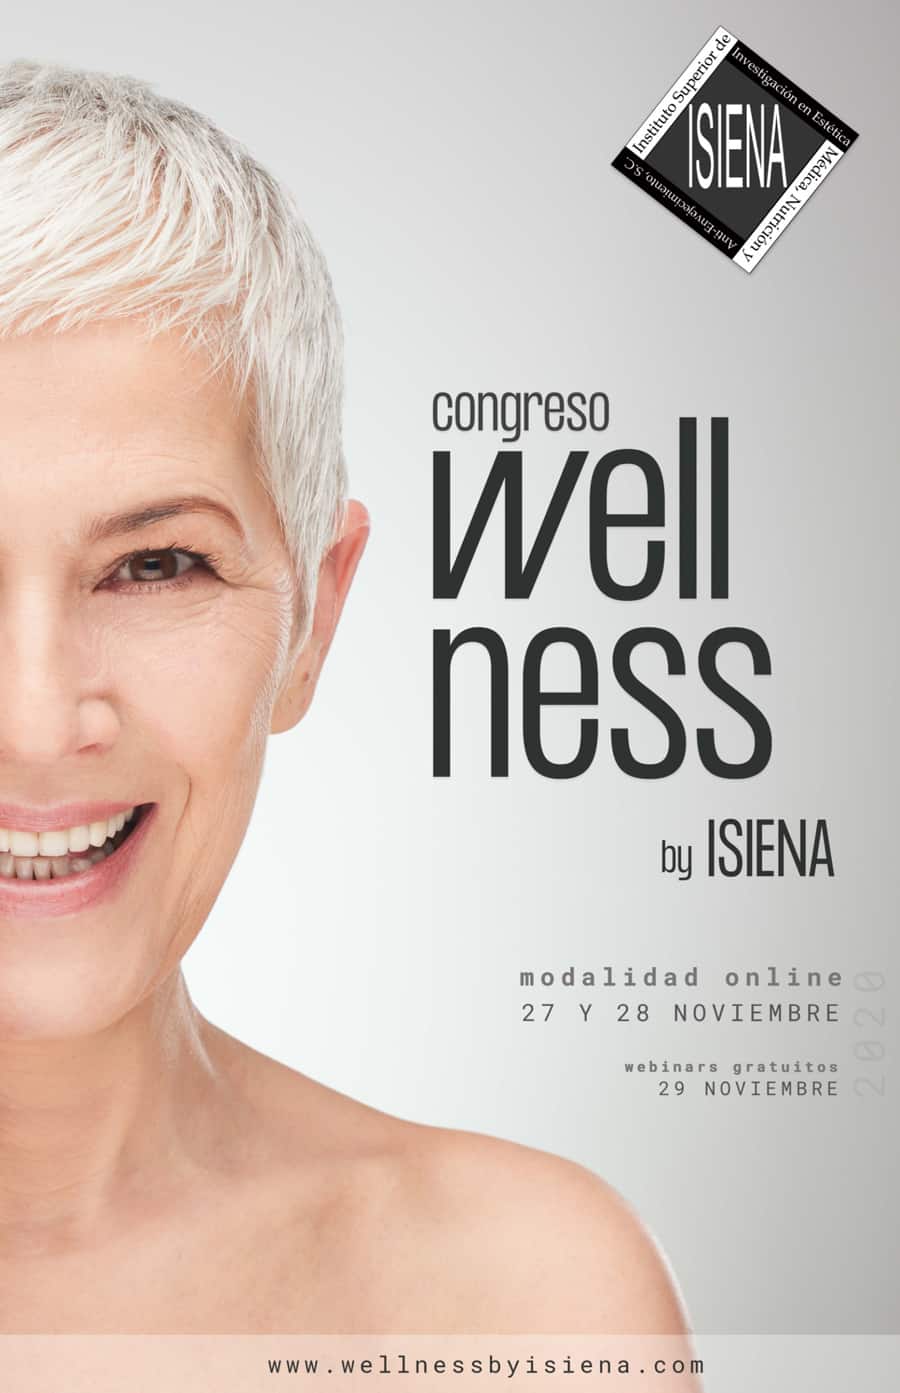 Congreso-Wellness-by-ISIENA-2020p